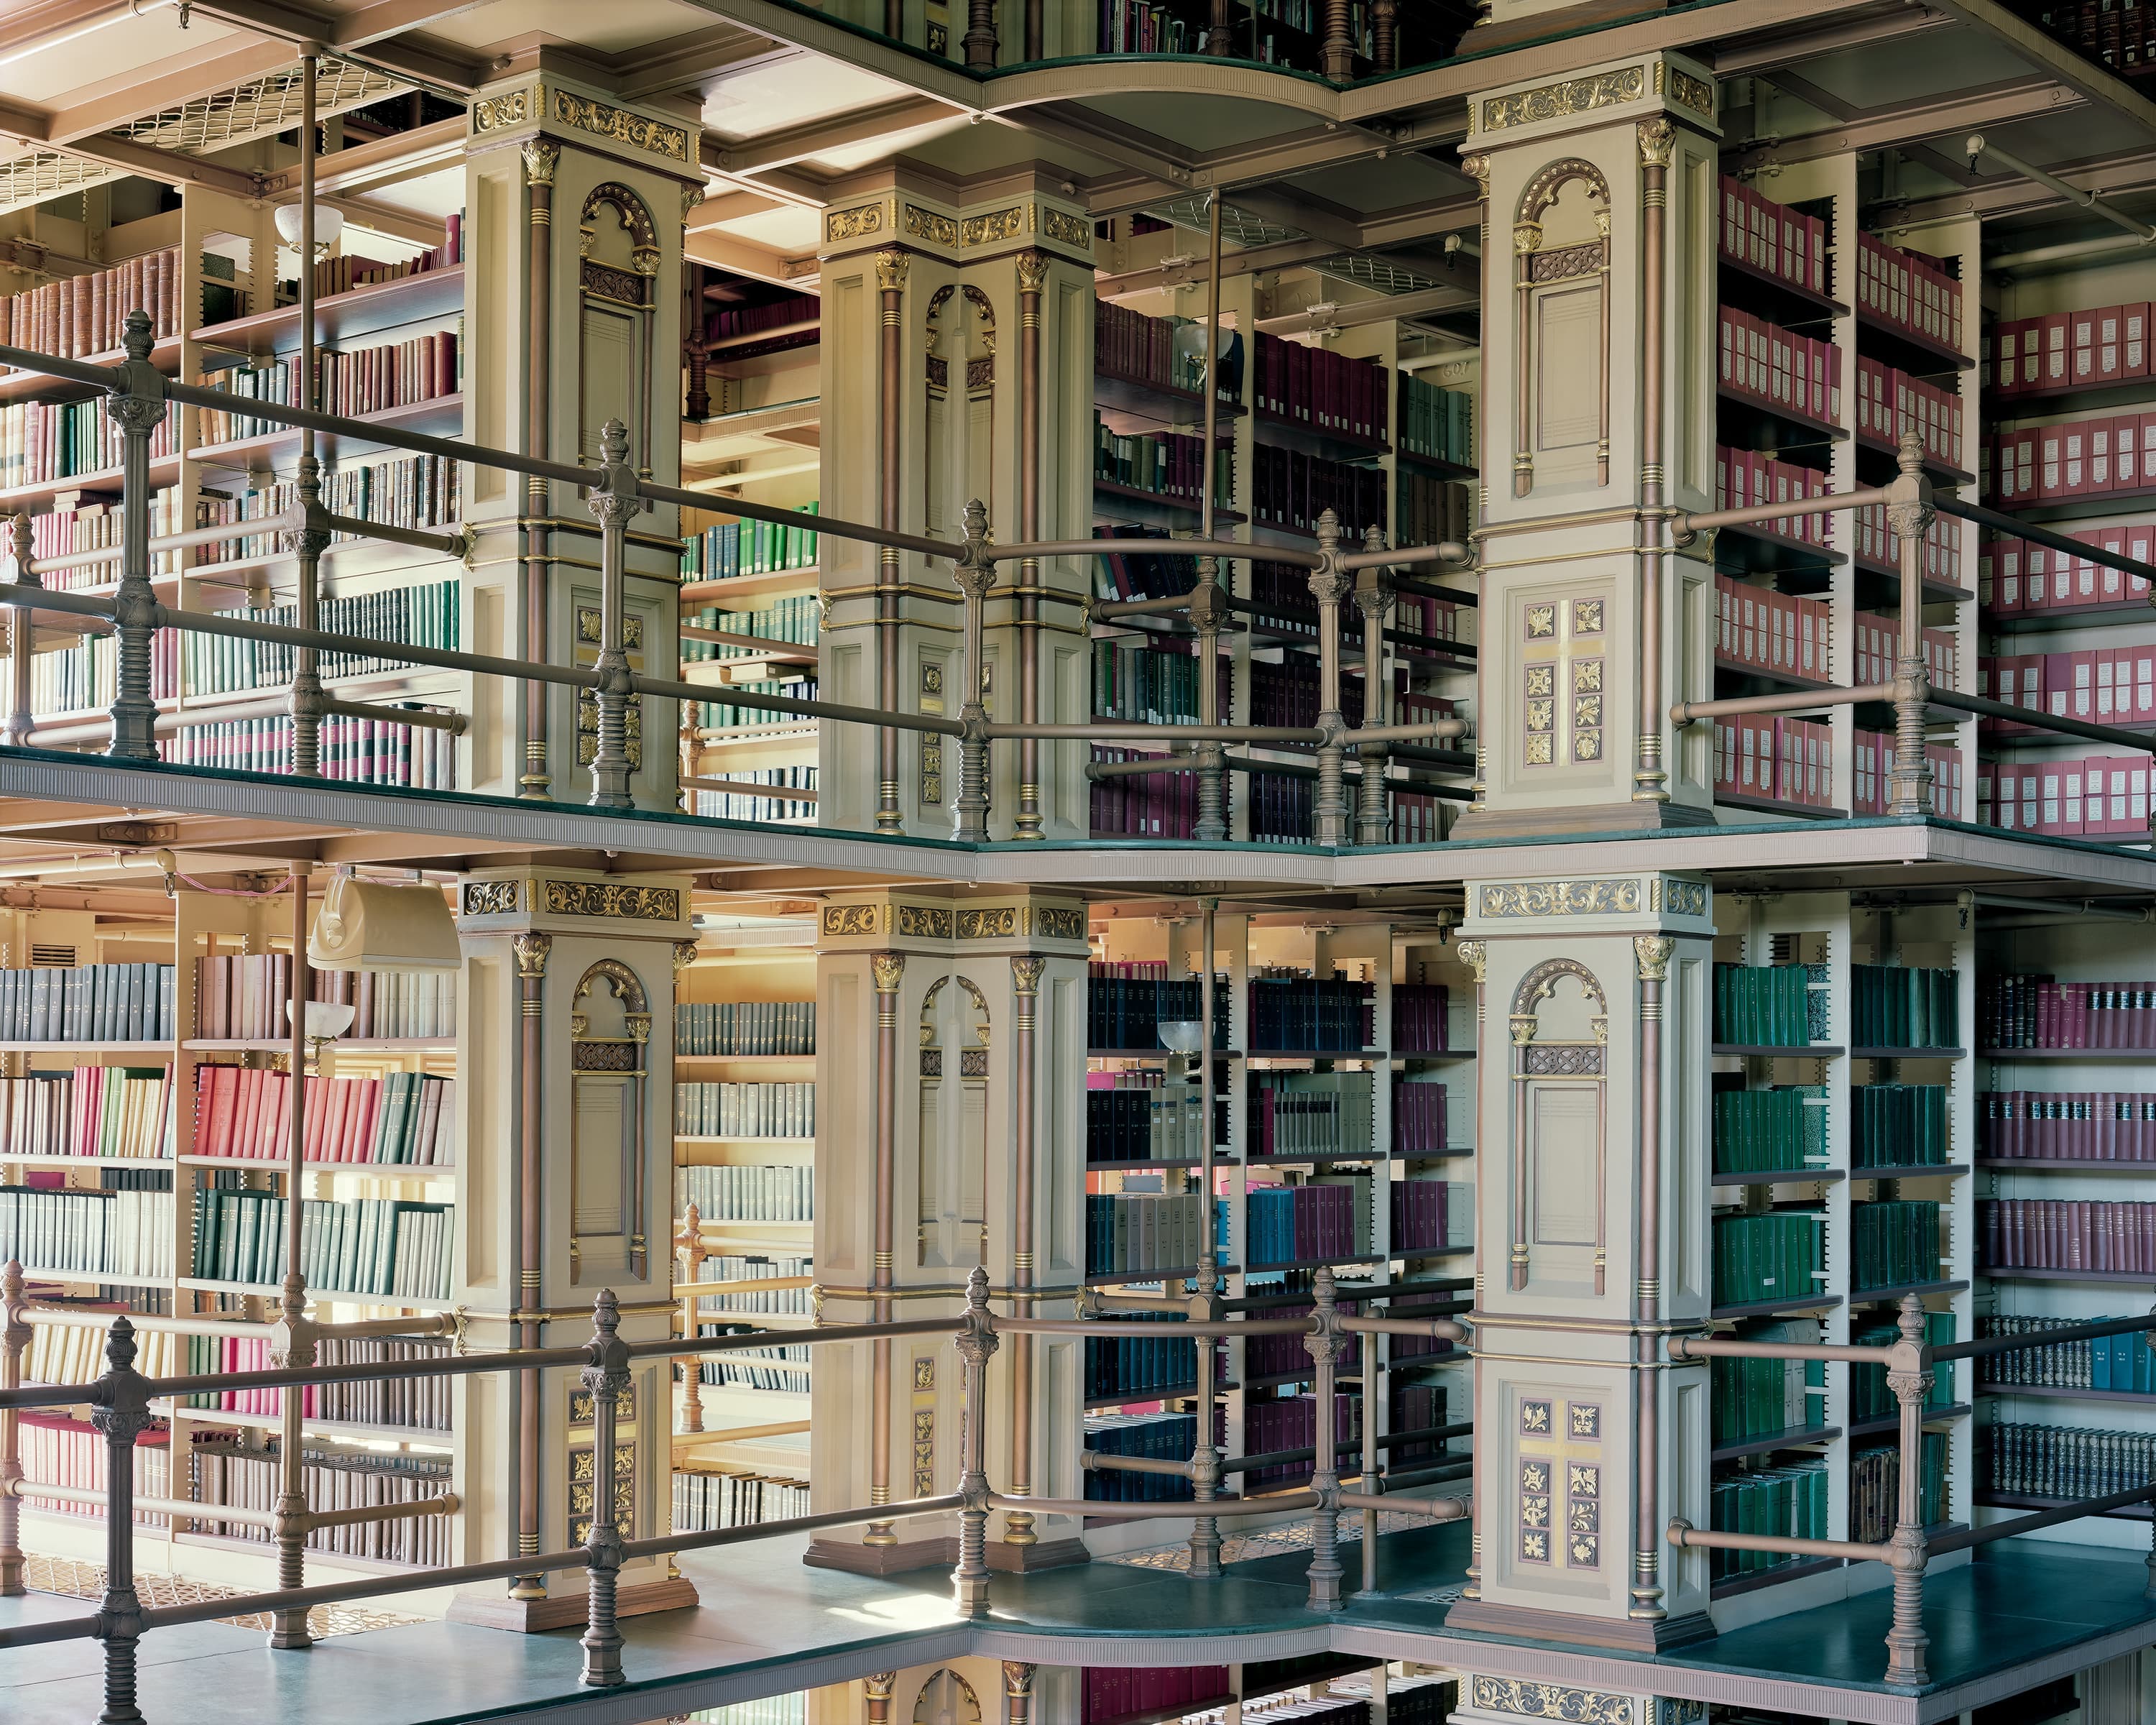 Historic Georgetown library, viewing multiple floors of shelves containing rare books.